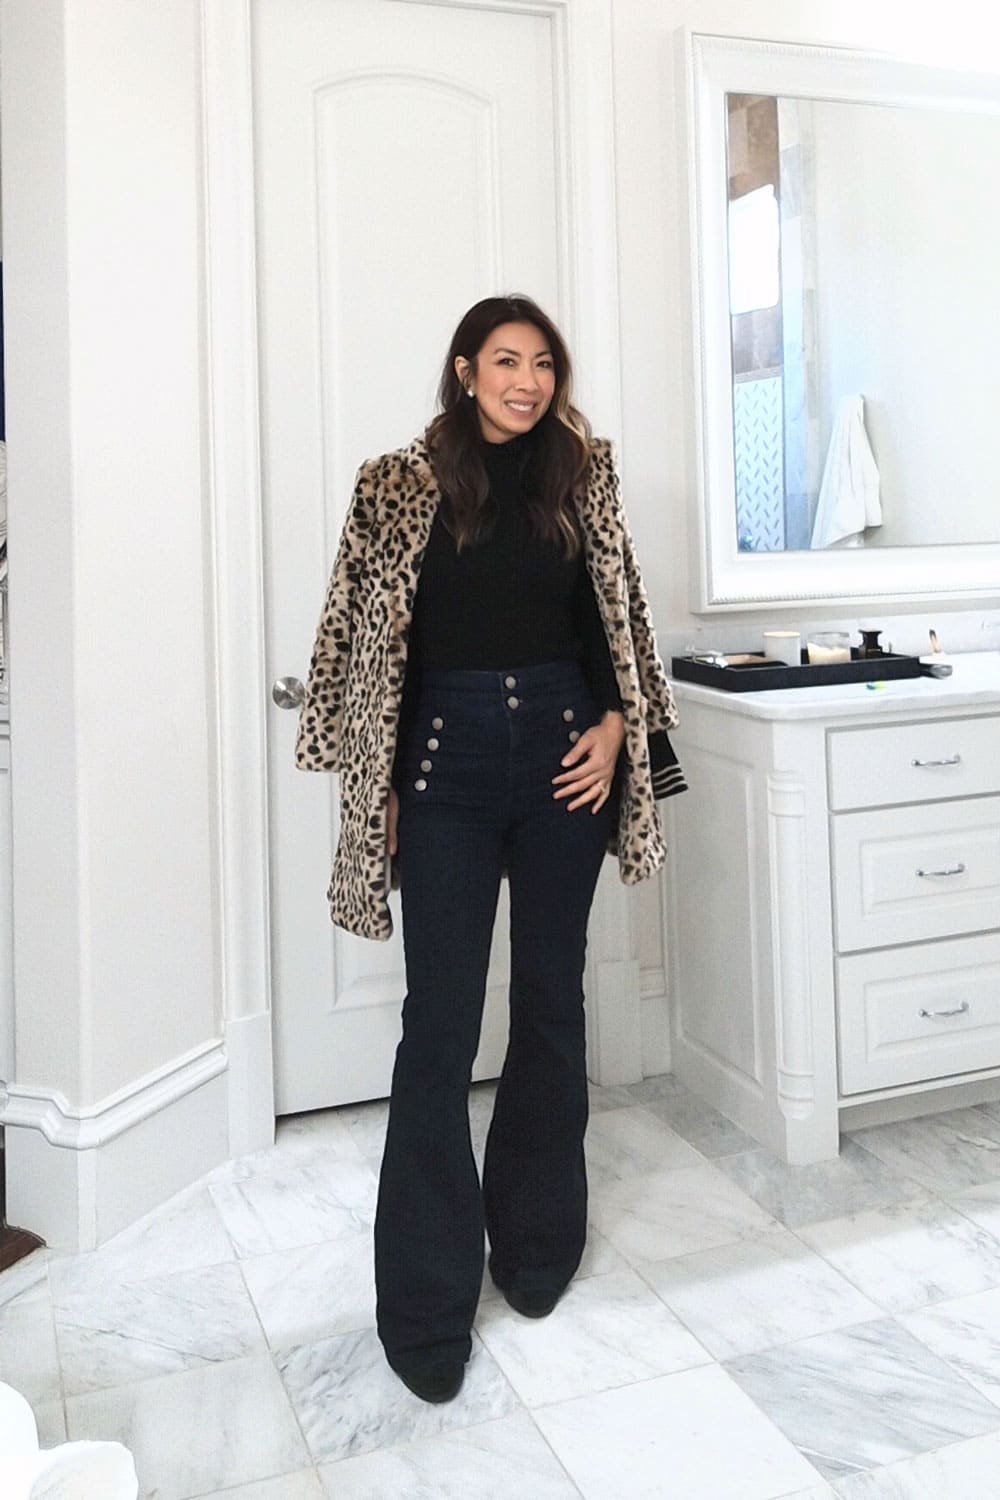 style of sam in winter outfit idea - black turtleneck, flare jeans, leopard coat